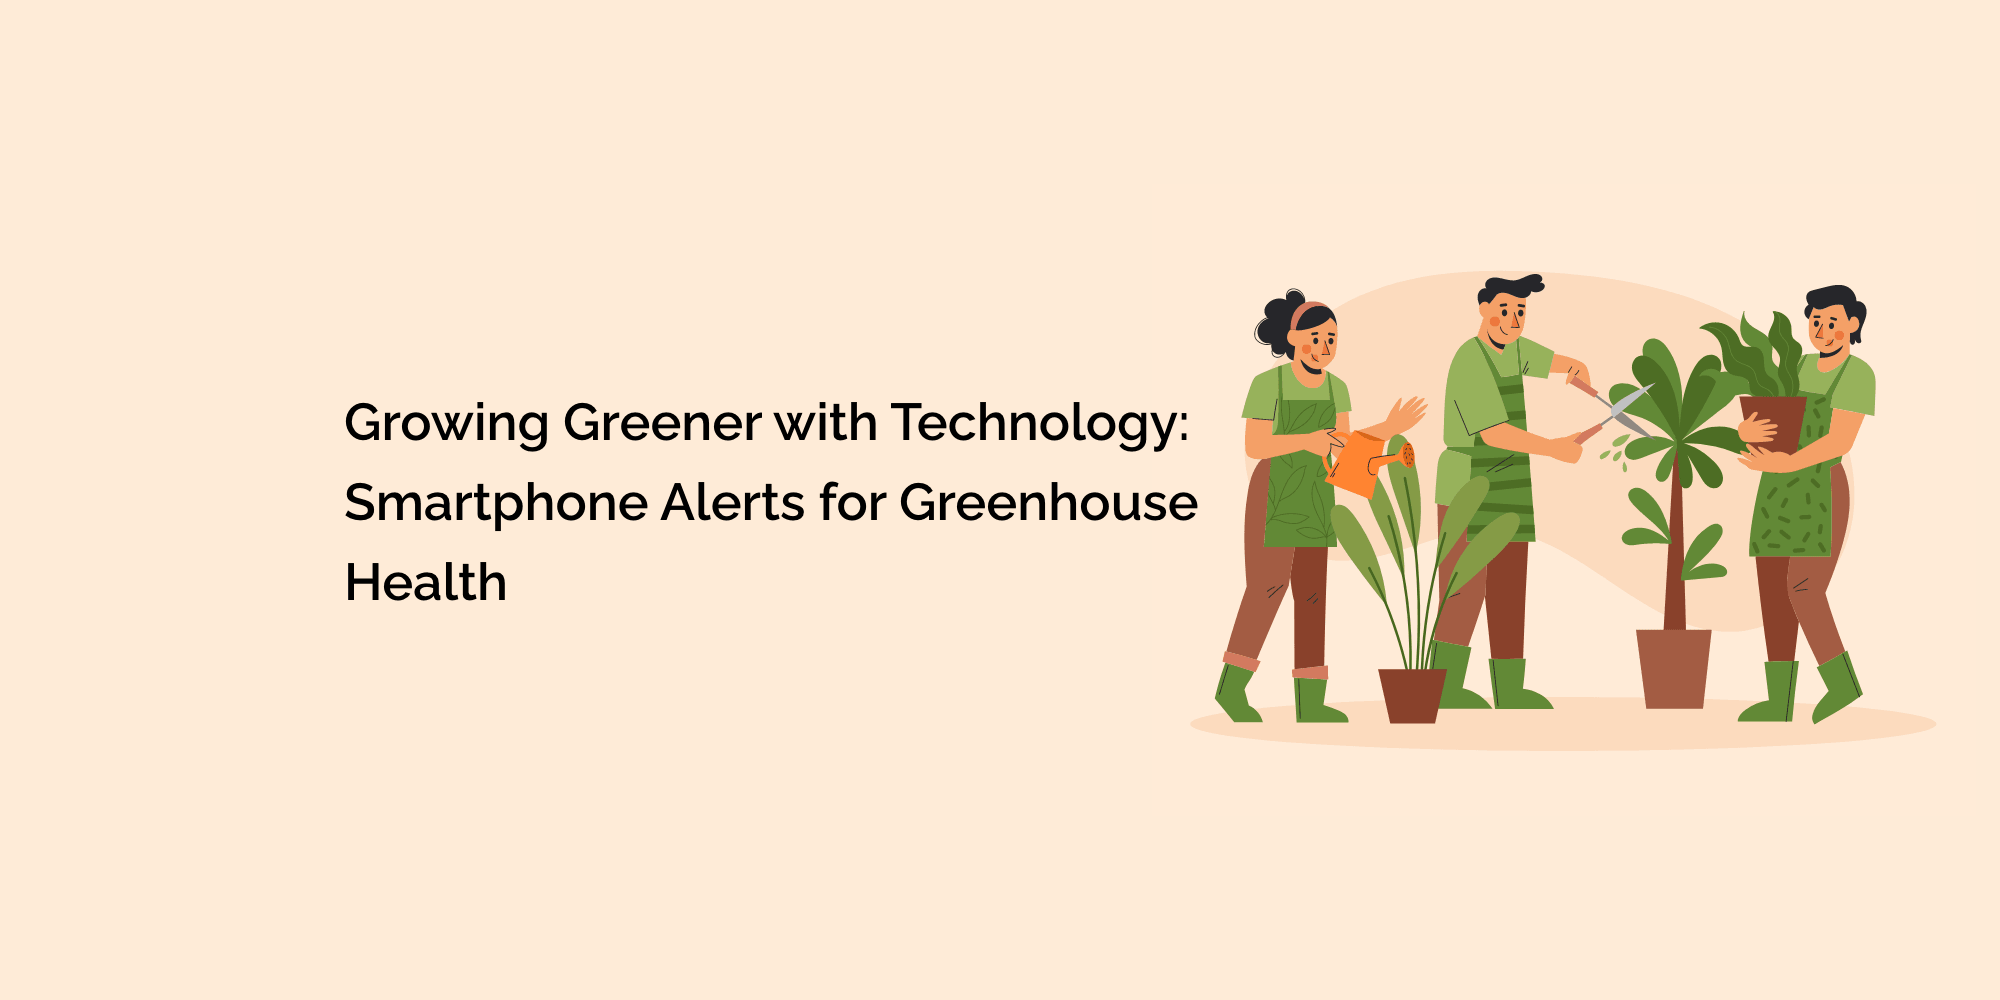 Growing Greener with Technology: Smartphone Alerts for Greenhouse Health